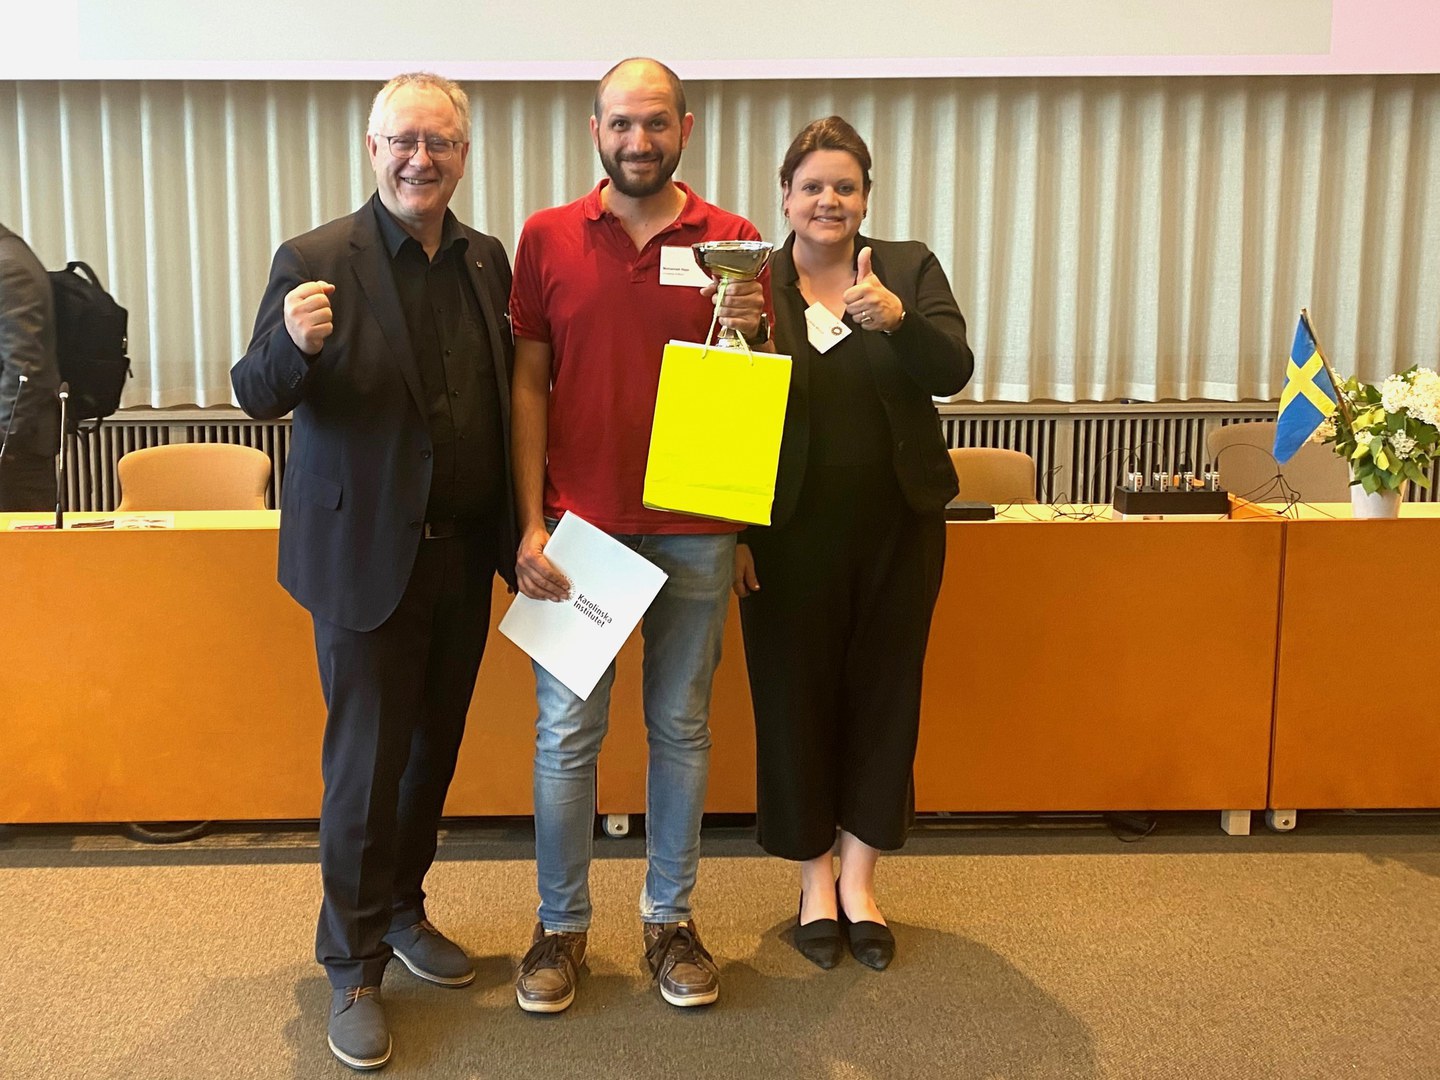 In parallel to the meeting of NeurotechEU leaders, the university alliance conducted its first-ever Hackathon. - Rector Michael Hoch (left) and Vice Rector Birgit Ulrike Münch (right) with the winner Mohamad Hajo, Mohamad Hajo, PhD student at the Bonn International Graduate School (BIGS) of Neuroscience.